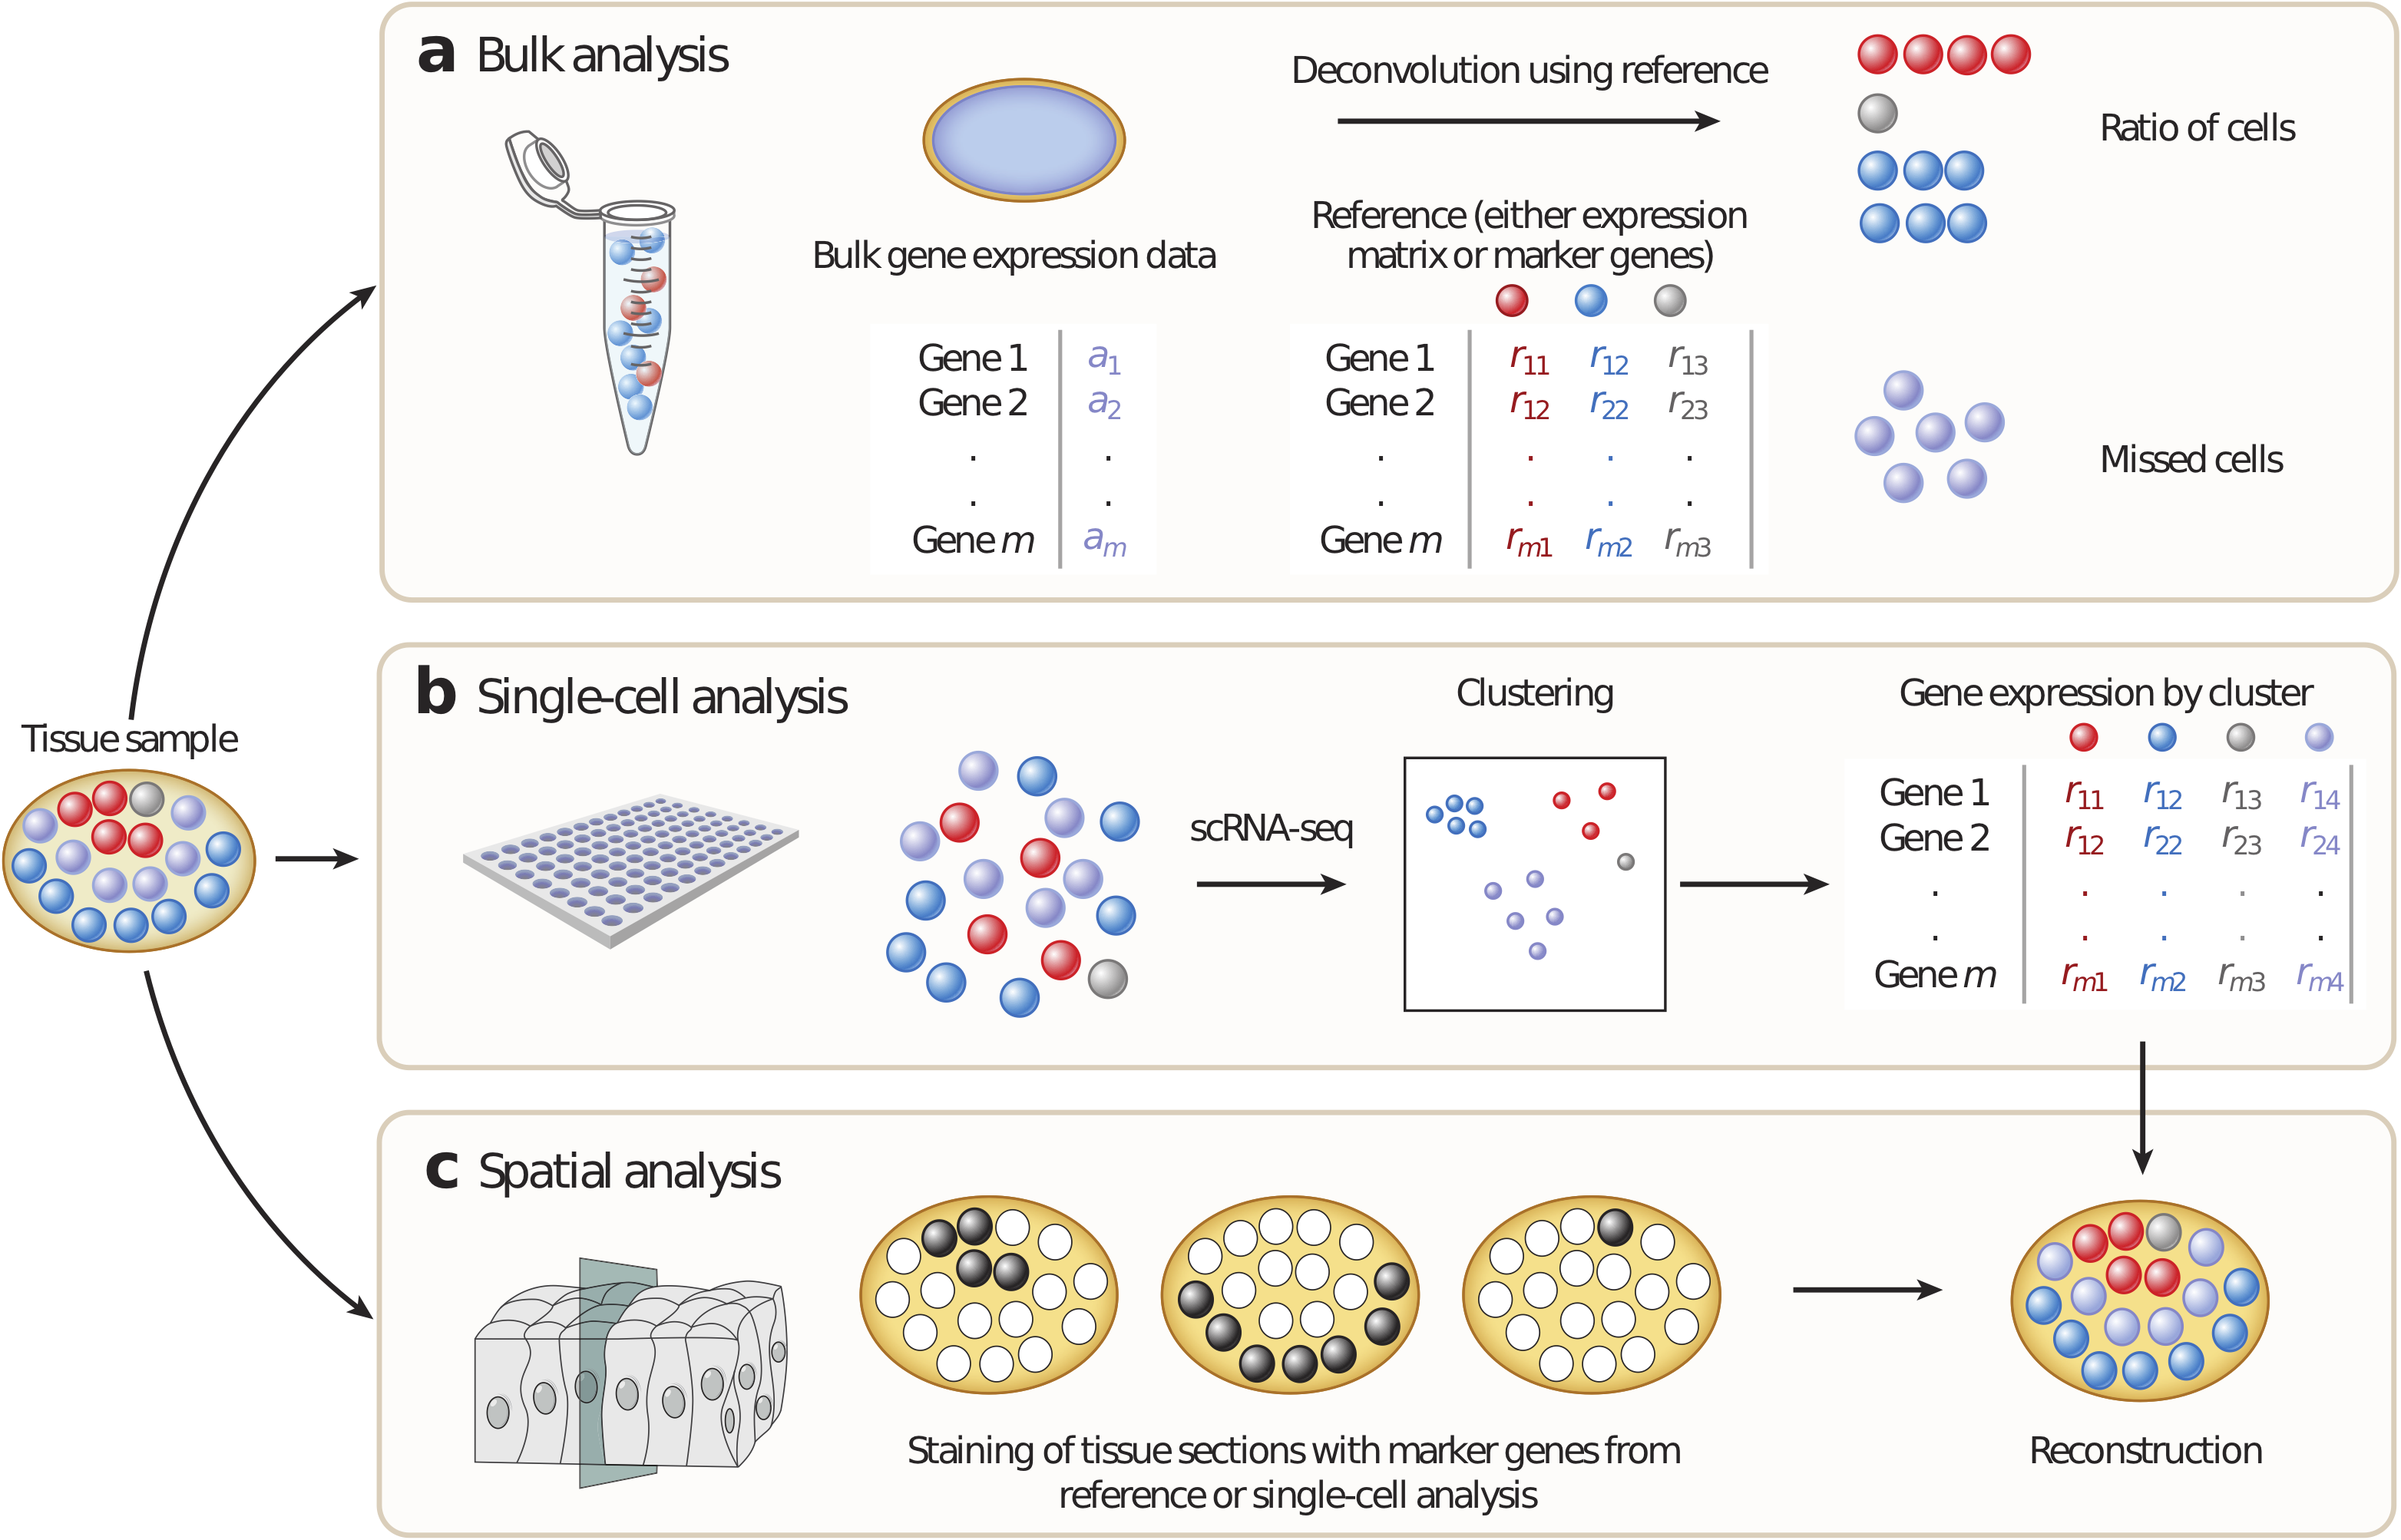 Overview of approaches to identify cell types with different technologies: bulk transcriptome, scRNA-seq and spatial transcriptomics. A - Bulk analysis: cell types are mixed in a sample and can be found in the mixture thanks to known refrence cell type profiles, B - In single-cell analysis, tissues are first dissociated to a single-cell suspension and then profiled individually by single-cell RNA sequencing (scRNA-seq). Cell types, including previously unknown cell types, can be identified but no positional information is retained. C - In spatial analysis, sections are cut from tissue blocks and the position of cell types within the tissue can be identified using marker genes. This technique generates two-dimensional (2D) information but often for only a few genes. Once spatial data are available, scRNA-seq data can be mapped back onto the tissue and it is possible to reconstruct a 2D image of the tissue. Reprinted by permission from Annu. Rev. Biomed. Data Sci. (Chen, Teichmann, and Meyer 2018) © Copyright 2018. All rights reserved.